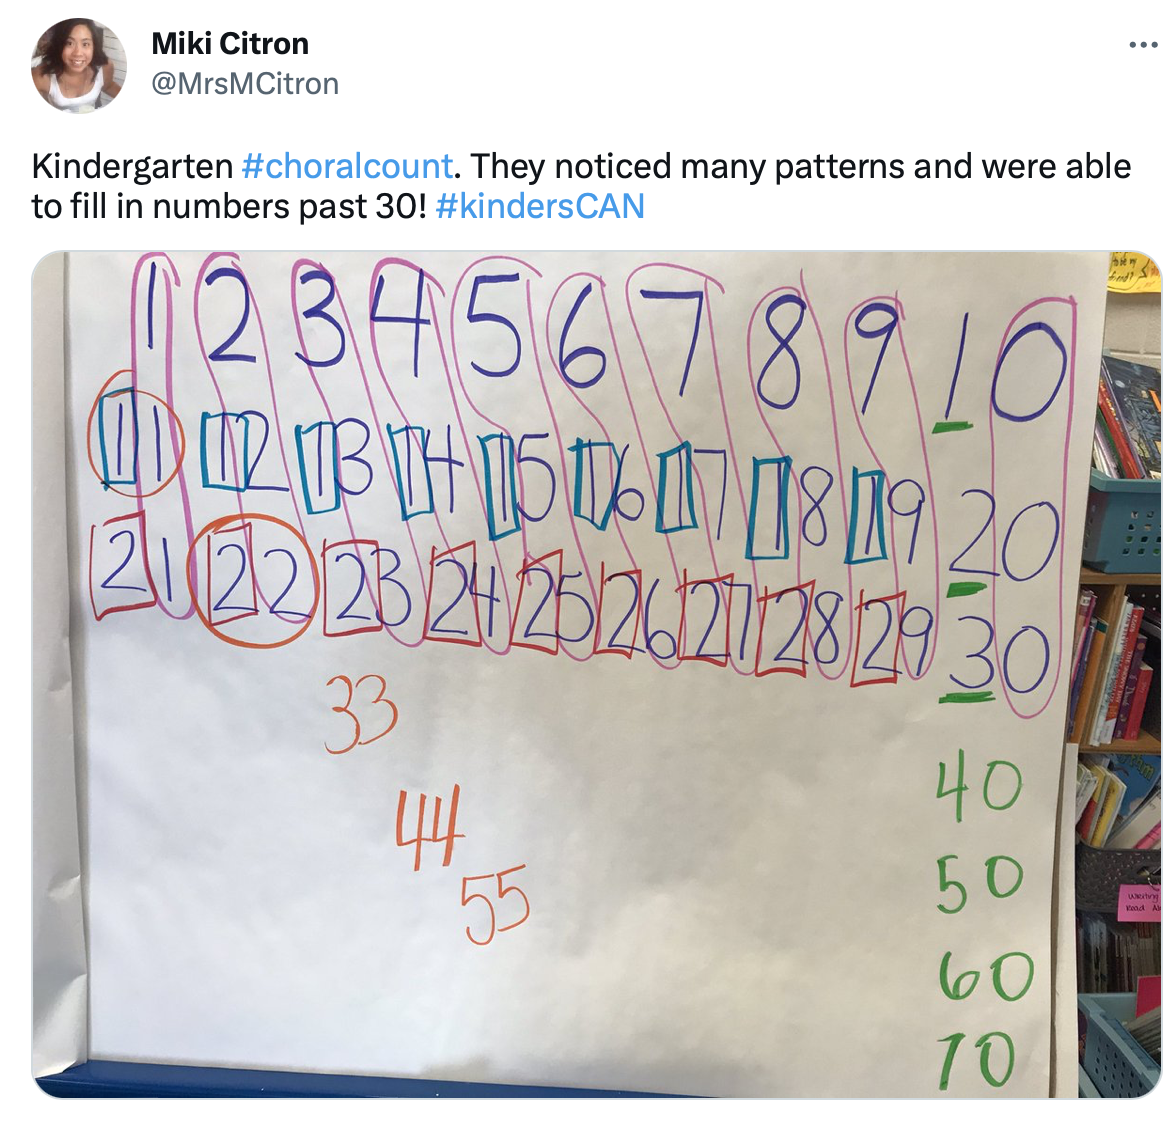 A tweet from Miki Citron. The image shows a chart from the choral count with three rows of numbers (1-10, 11-20, 21-30). The column with 10, 20, 30 extends to 40, 50, 60, 70. Diagonally below 22 is 33, 44, 55.